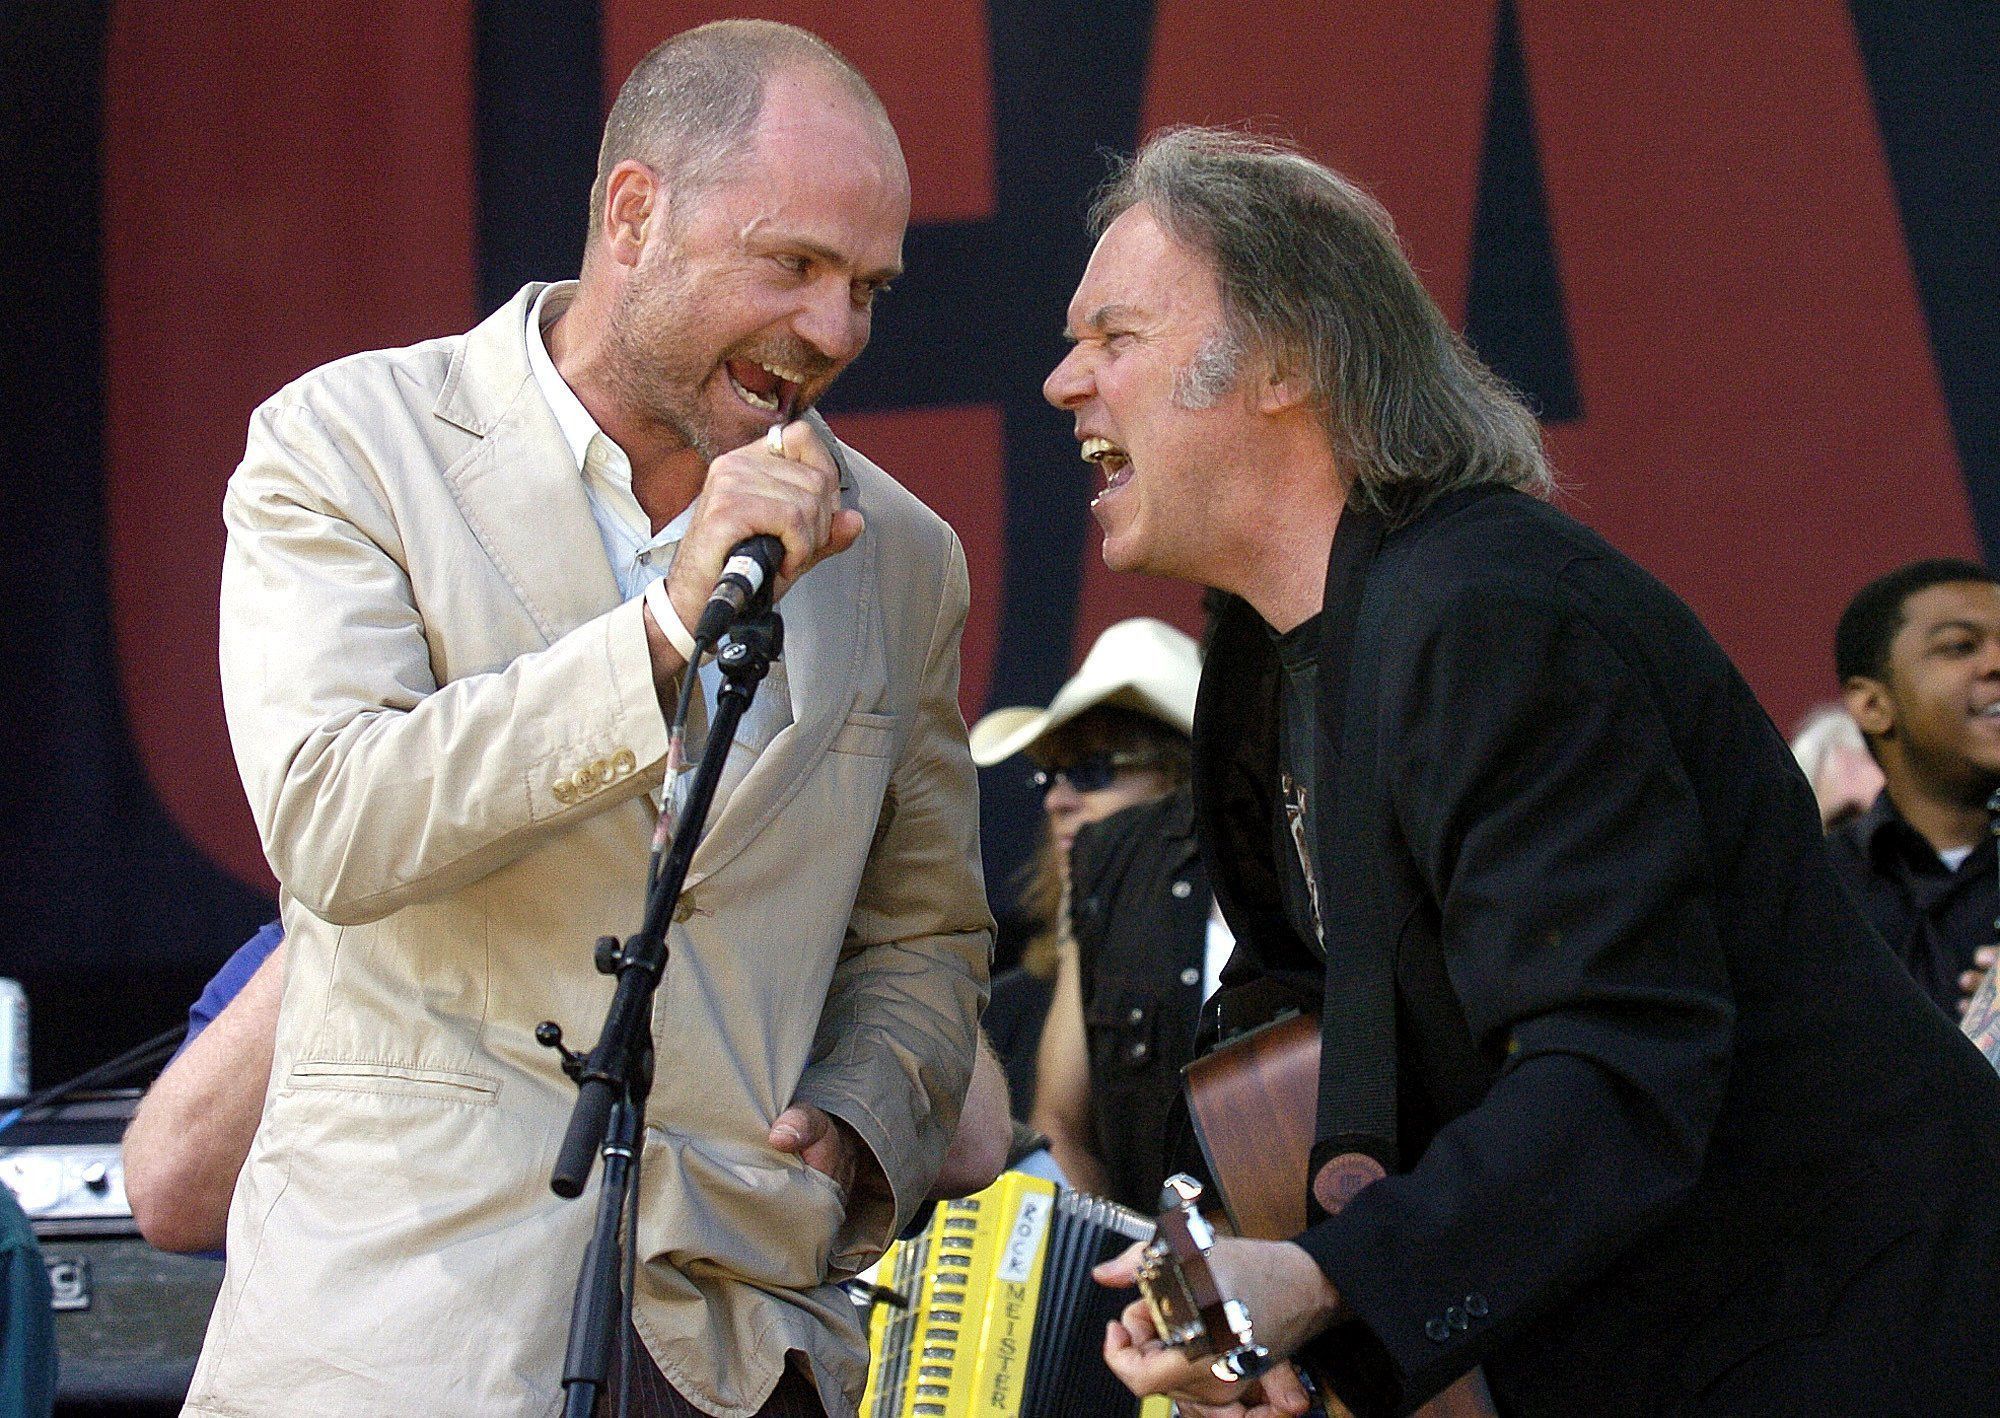 n this July 2, 2005, photo, Gord Downie of The Tragically Hip (left) and Neil Young perform during the finale of the Canadian Live 8 concert in Barrie, Ontario. The Tragically Hip announced Tuesday that Downie has been diagnosed with terminal brain cancer.